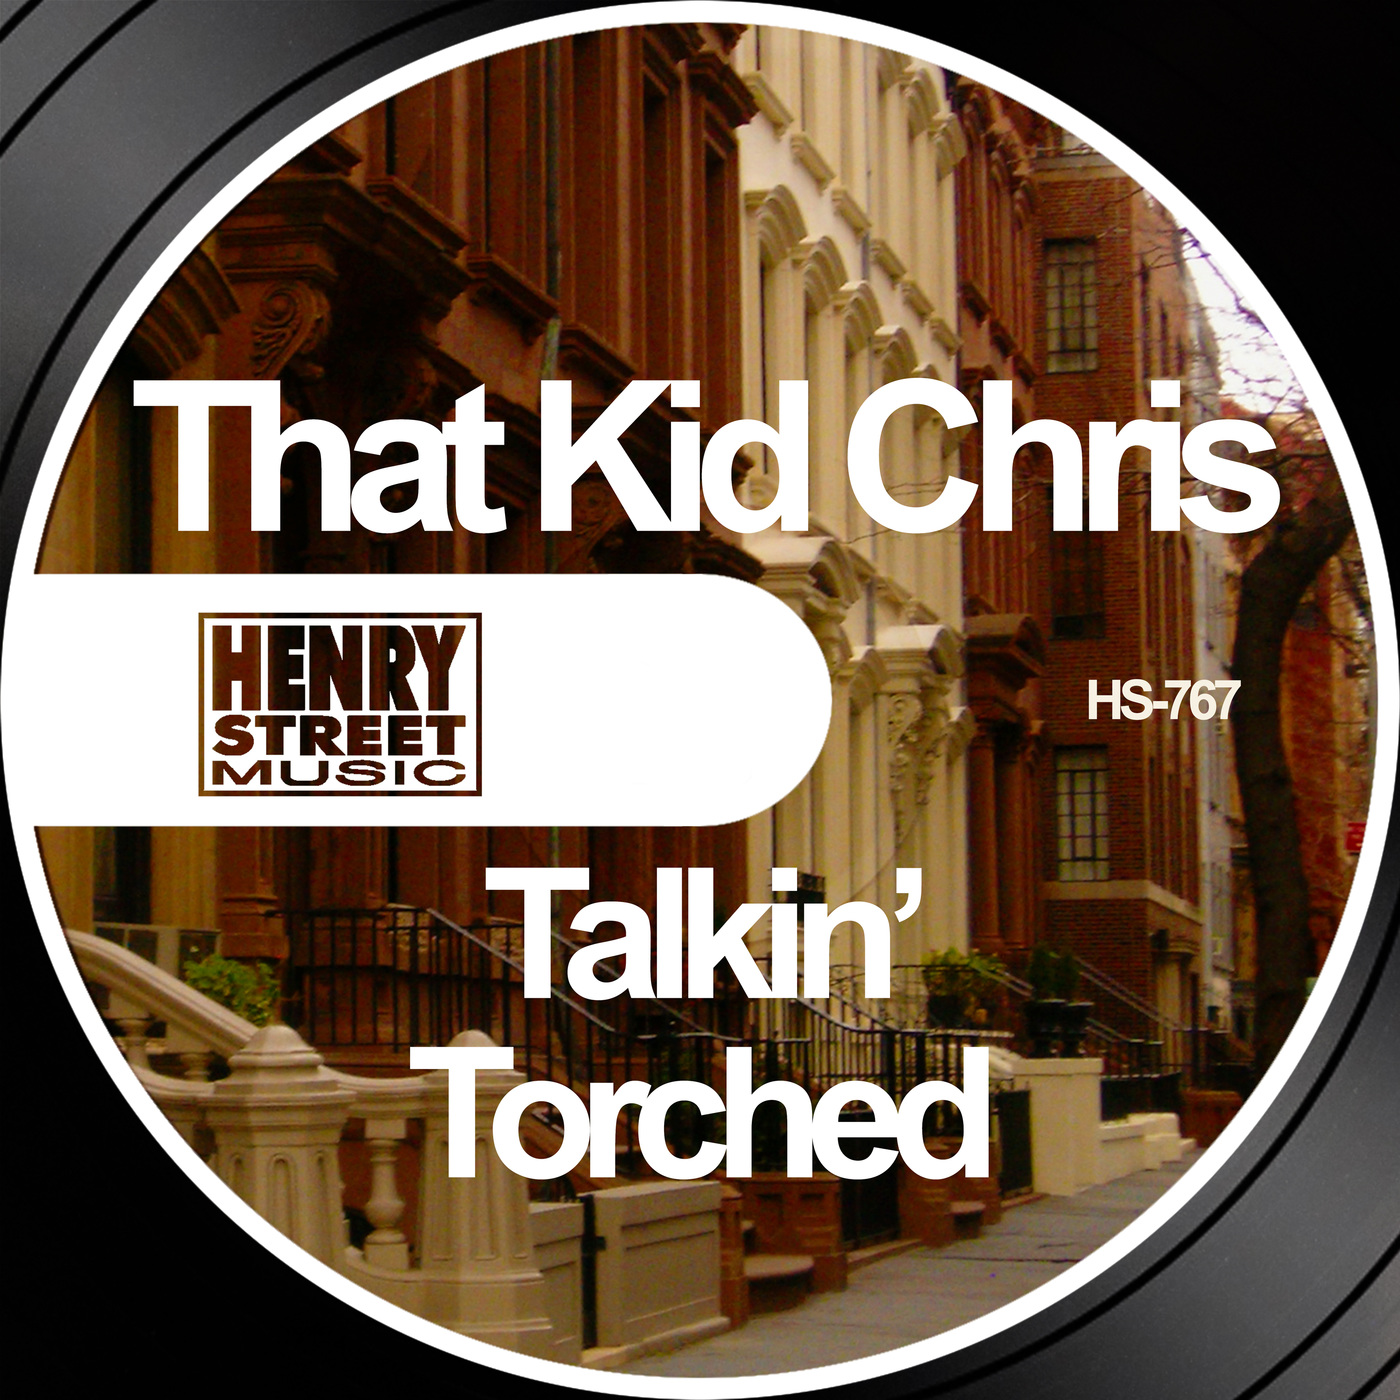 That Kid Chris - Talking / Torched / Henry Street Music